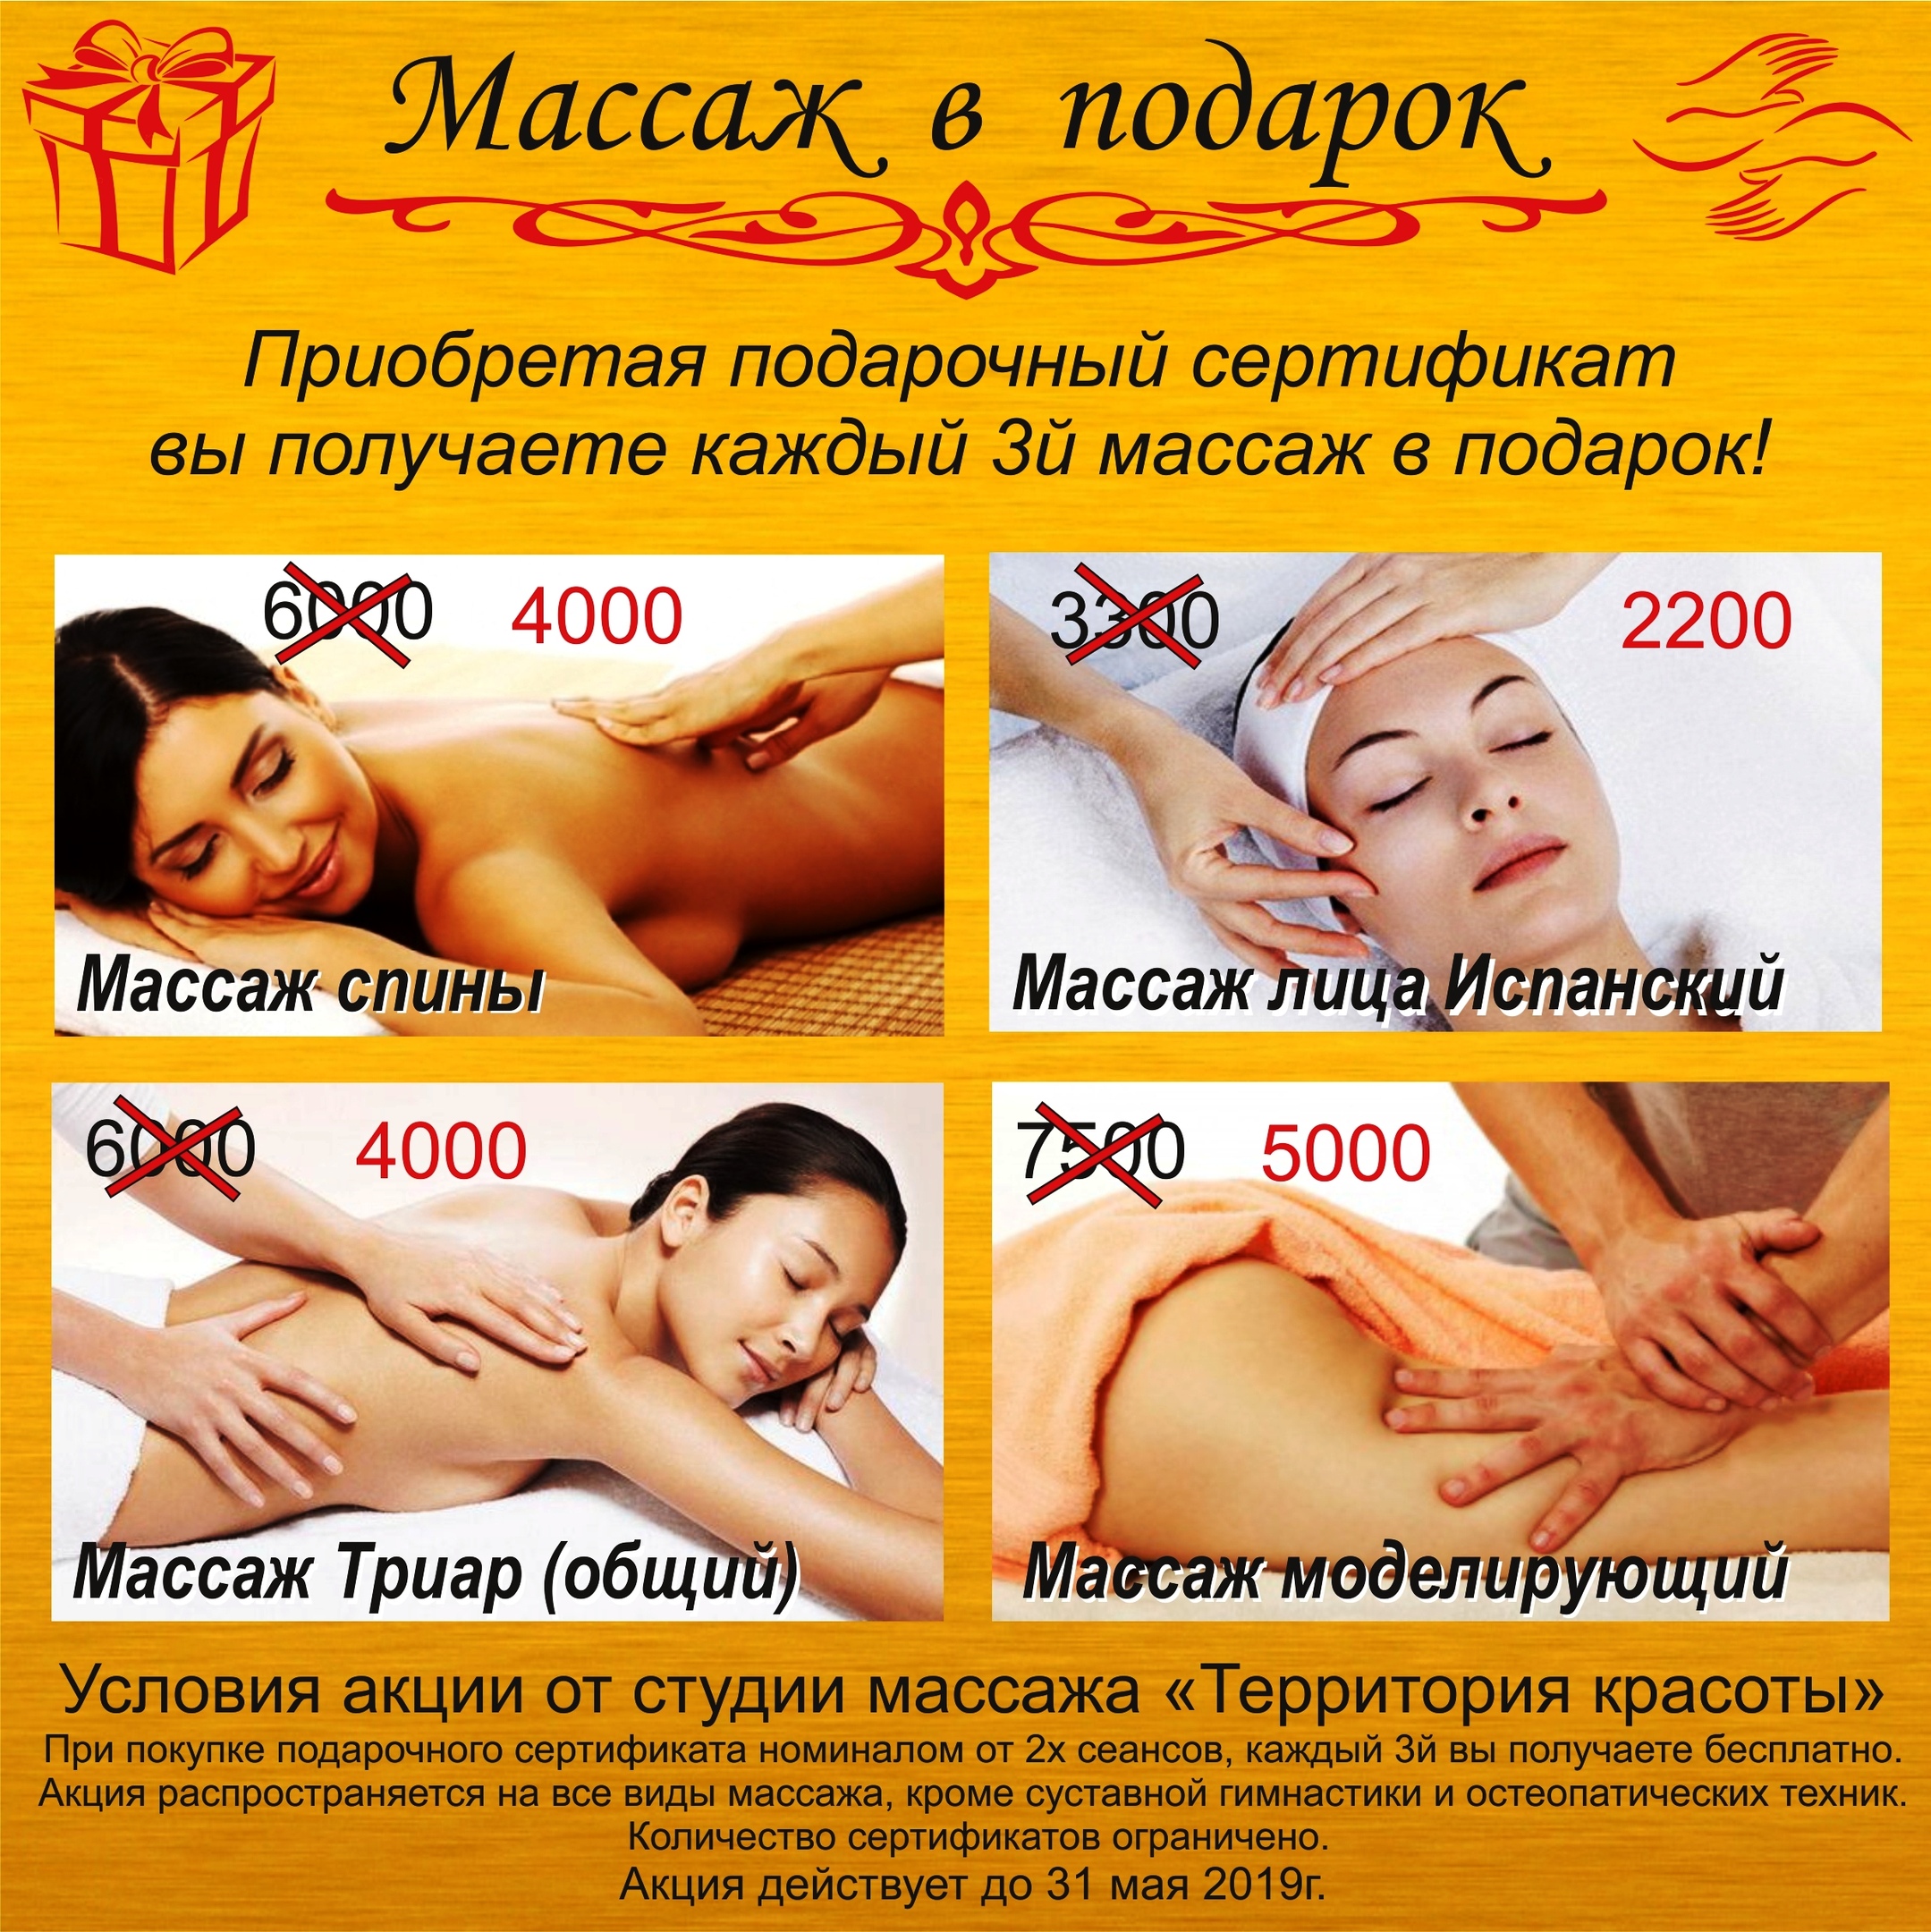 Erotic massage in remond or